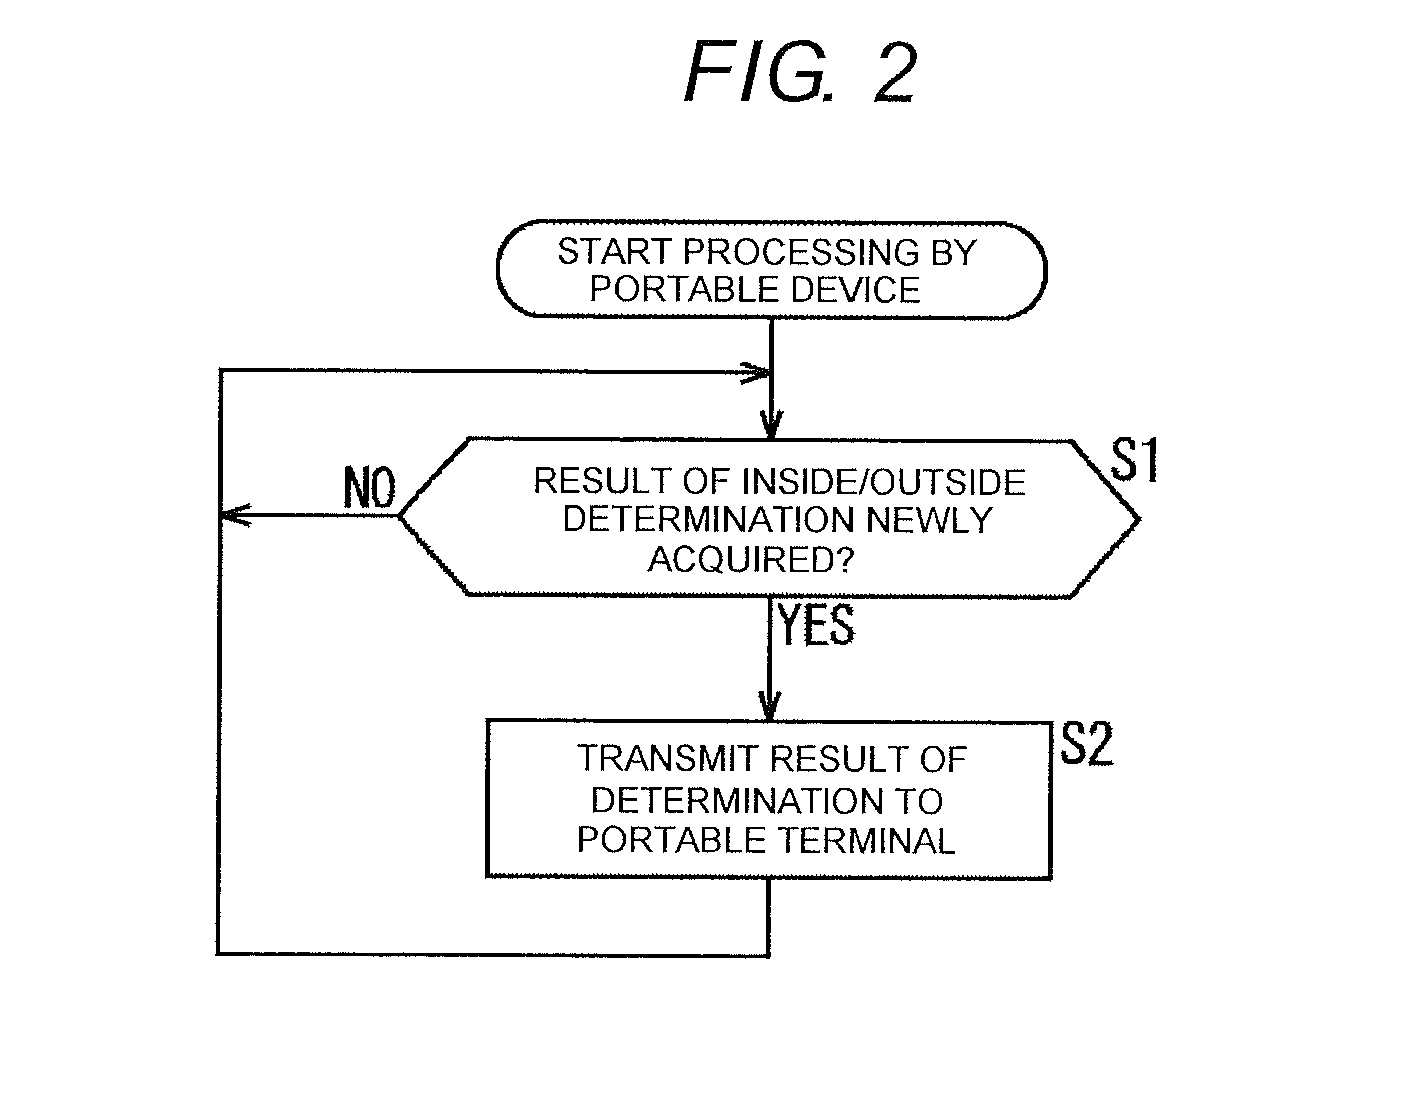 Reporting system, reporting control method, and handheld device